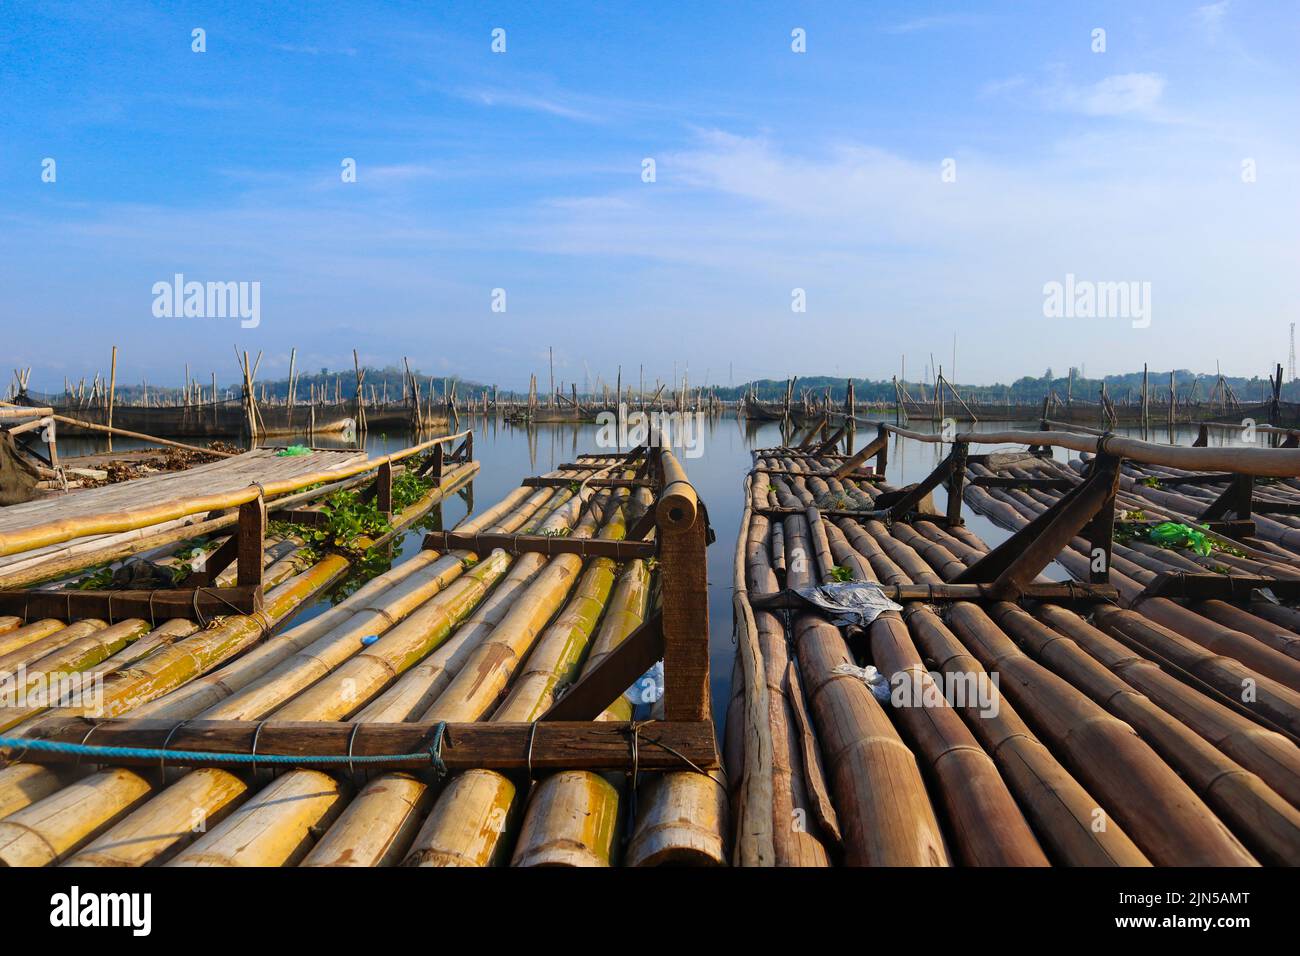 Many Fish Cages That Build Bamboo Stock Photo 1597919764